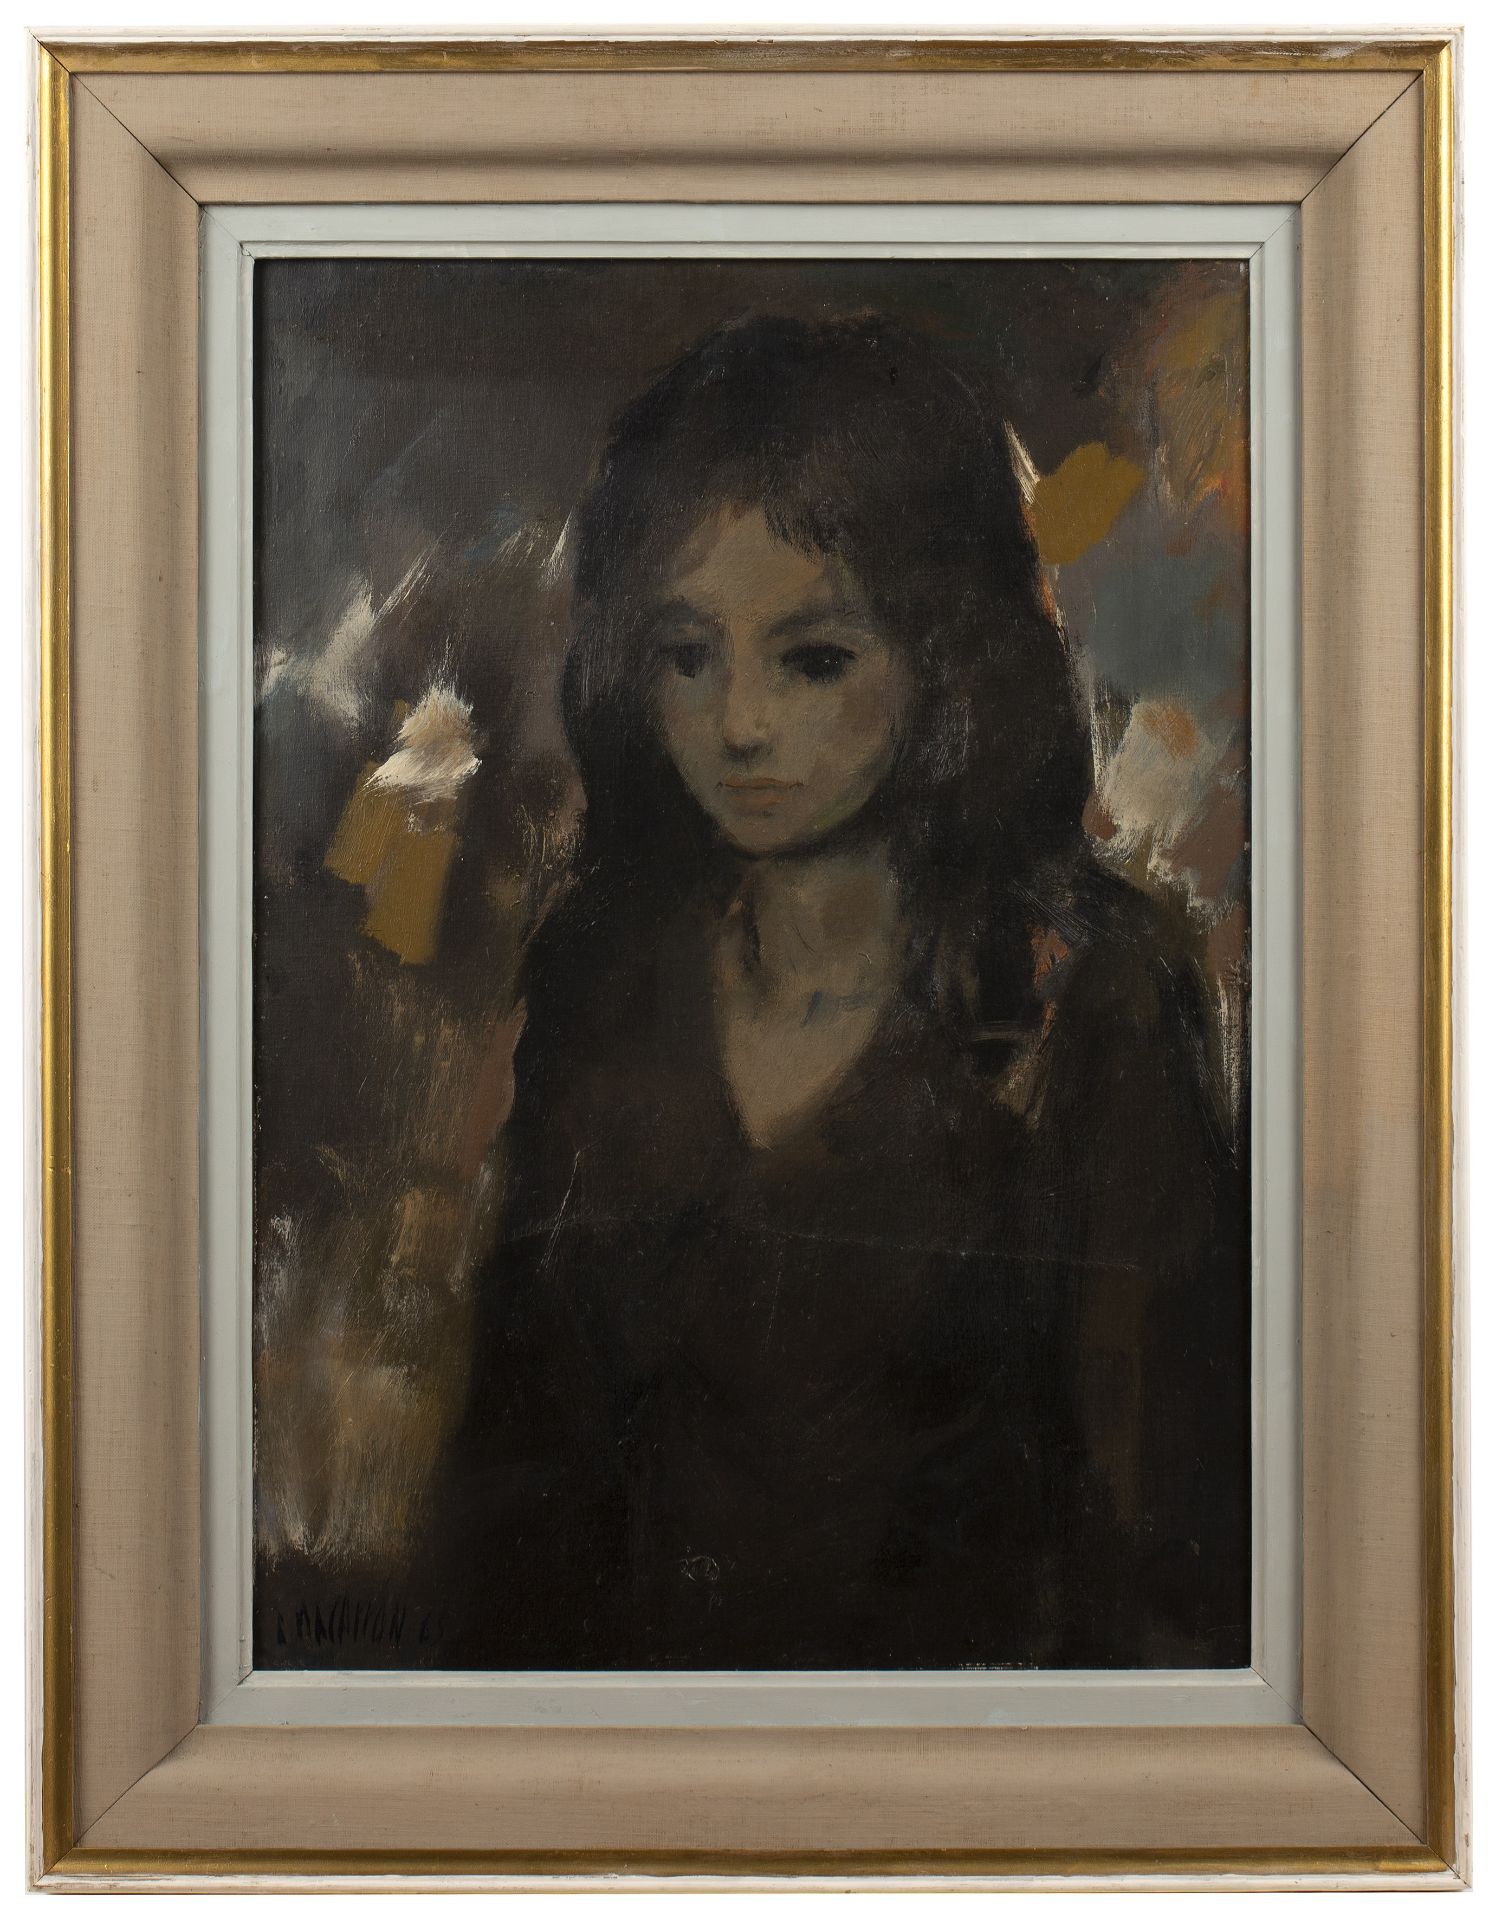 Richard Macarron (20th Century School) 'Susanna', oil on canvas, signed and dated '65 lower left, - Image 2 of 3